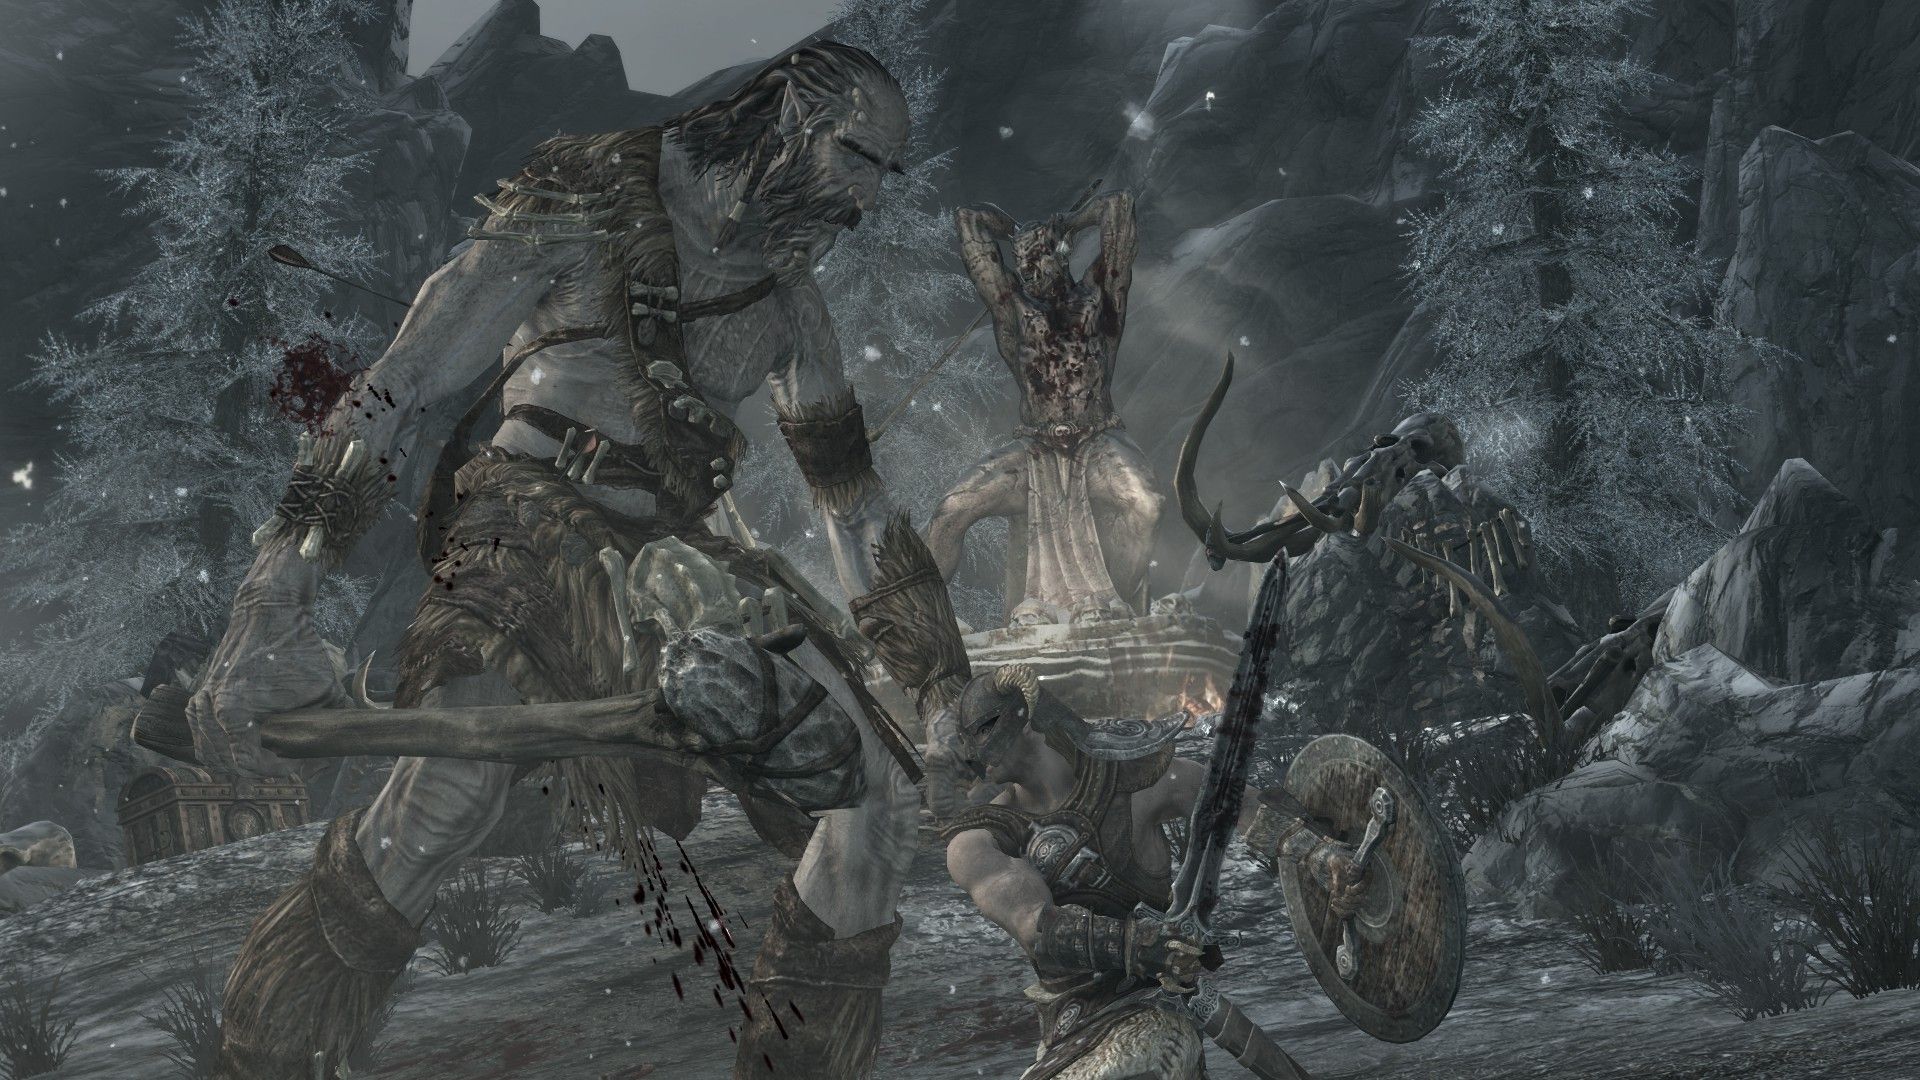 A warrior fights a menacing giant with a sword with a blood-drenched altar in the background.